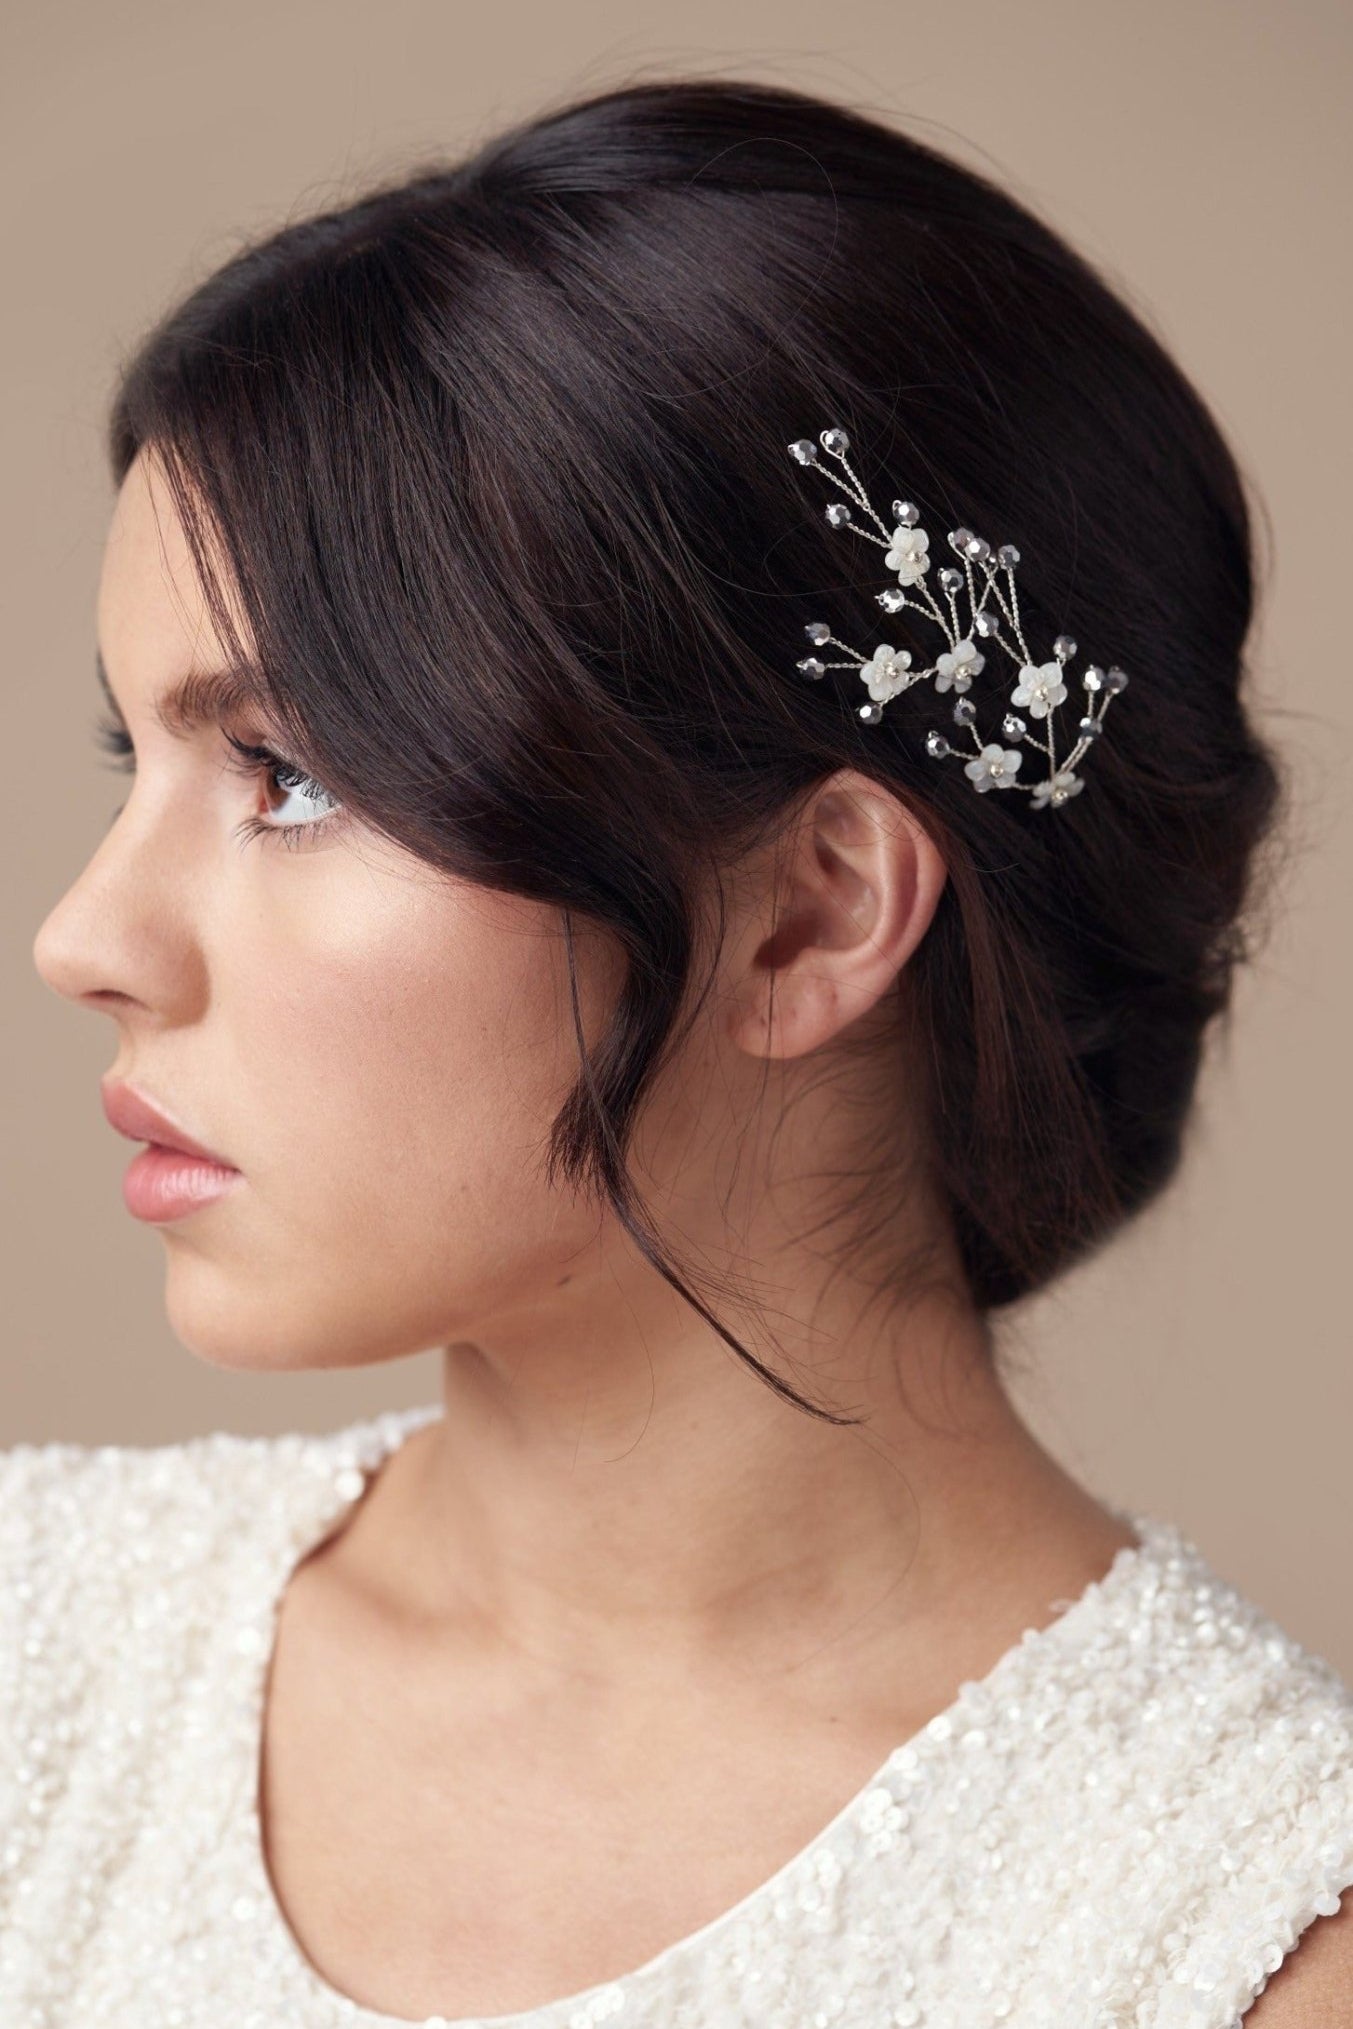 Flower wedding hairpins trio set in mother of pearl and silver laboradite crystal 